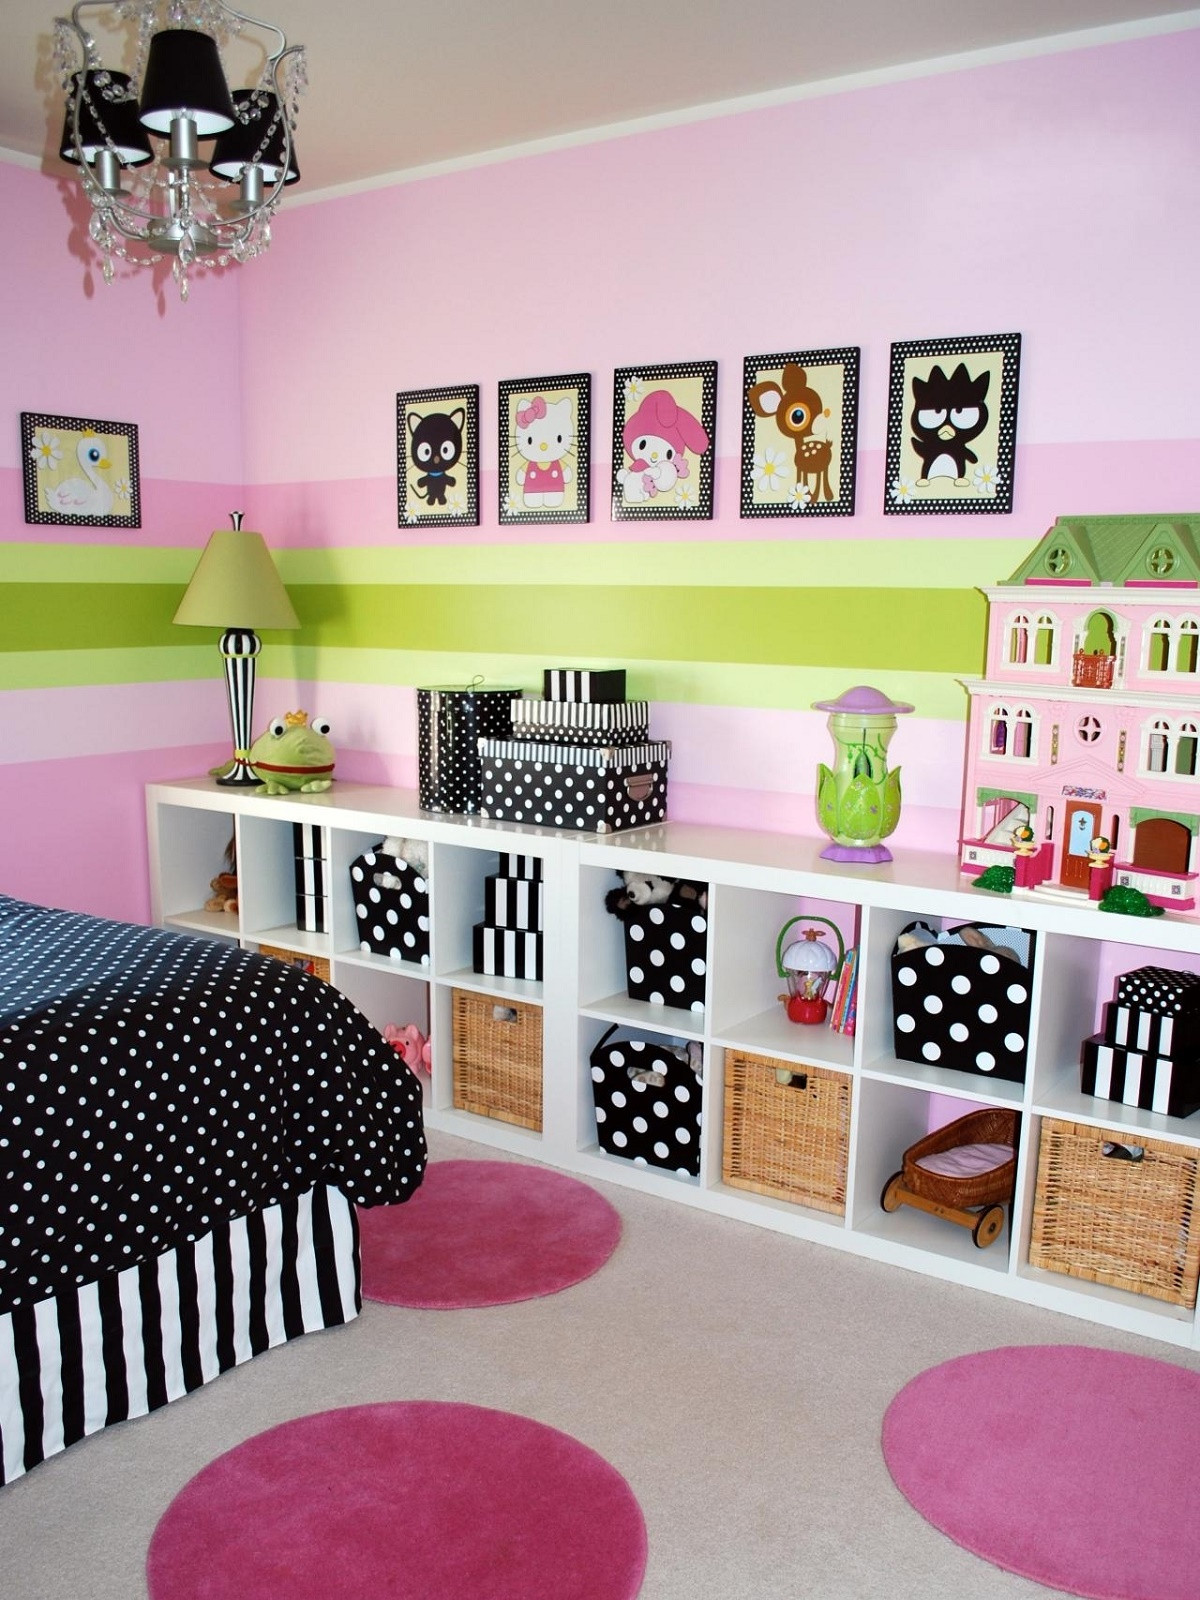 Cute Crafts To Decorate Your Room
 42 Cool Kids Room Decorating Ideas That Inspire You And